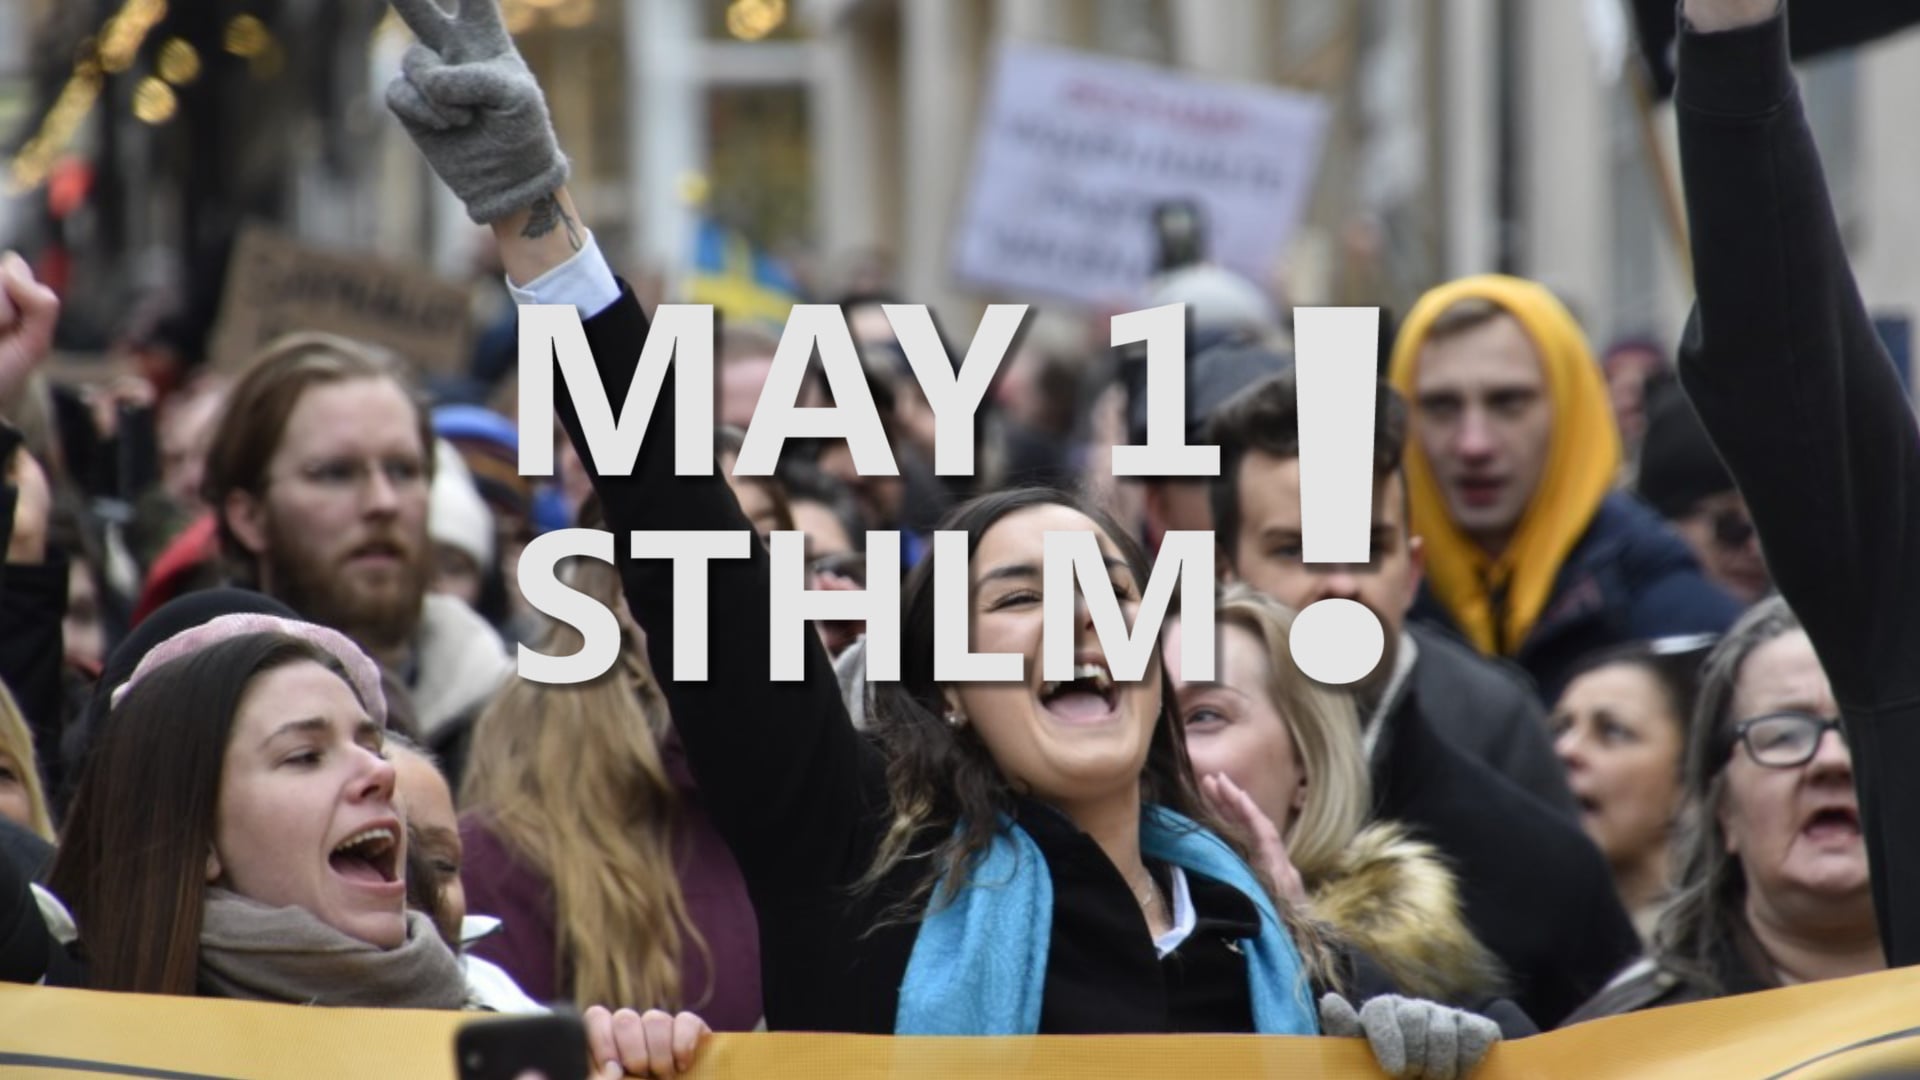 May 1st March in Stockholm 2021 - Are You With Us?